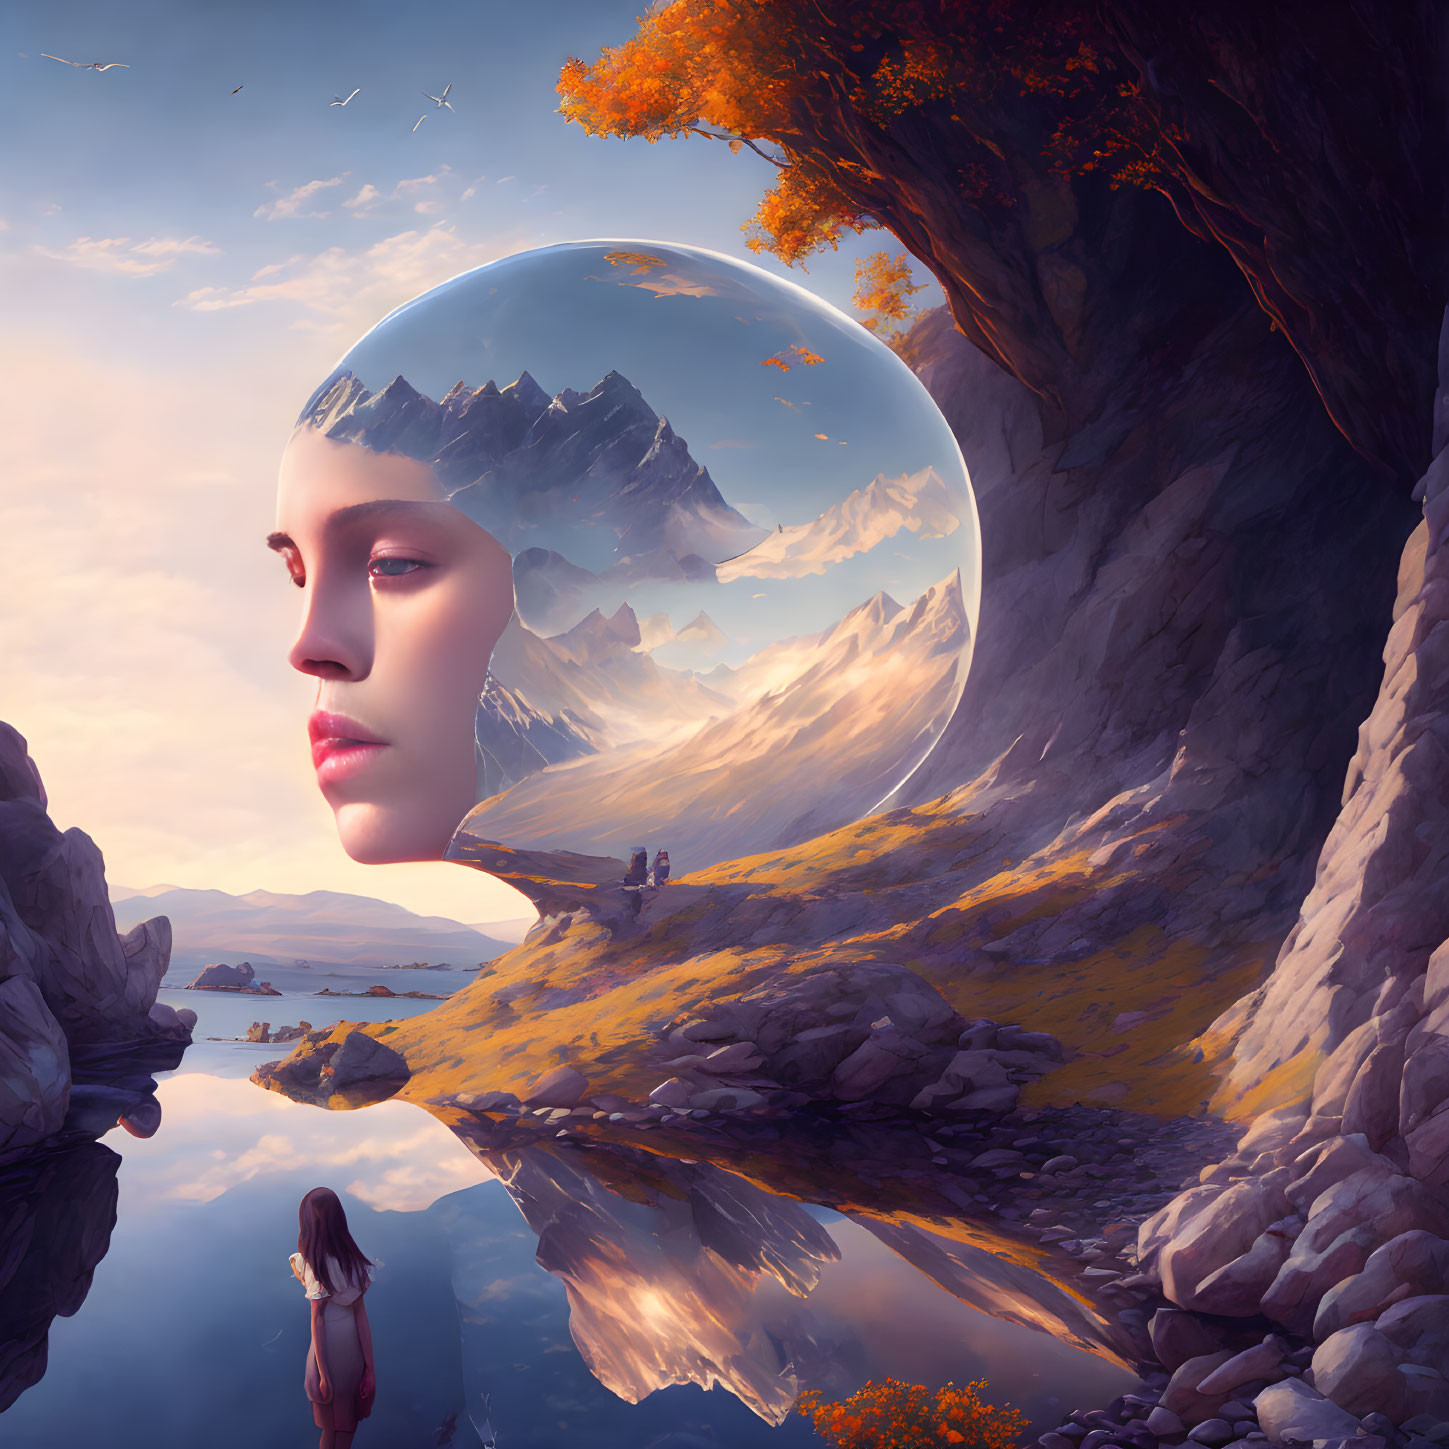 Surreal landscape with giant female face, snowy mountains, autumn trees, reflective lake, and small